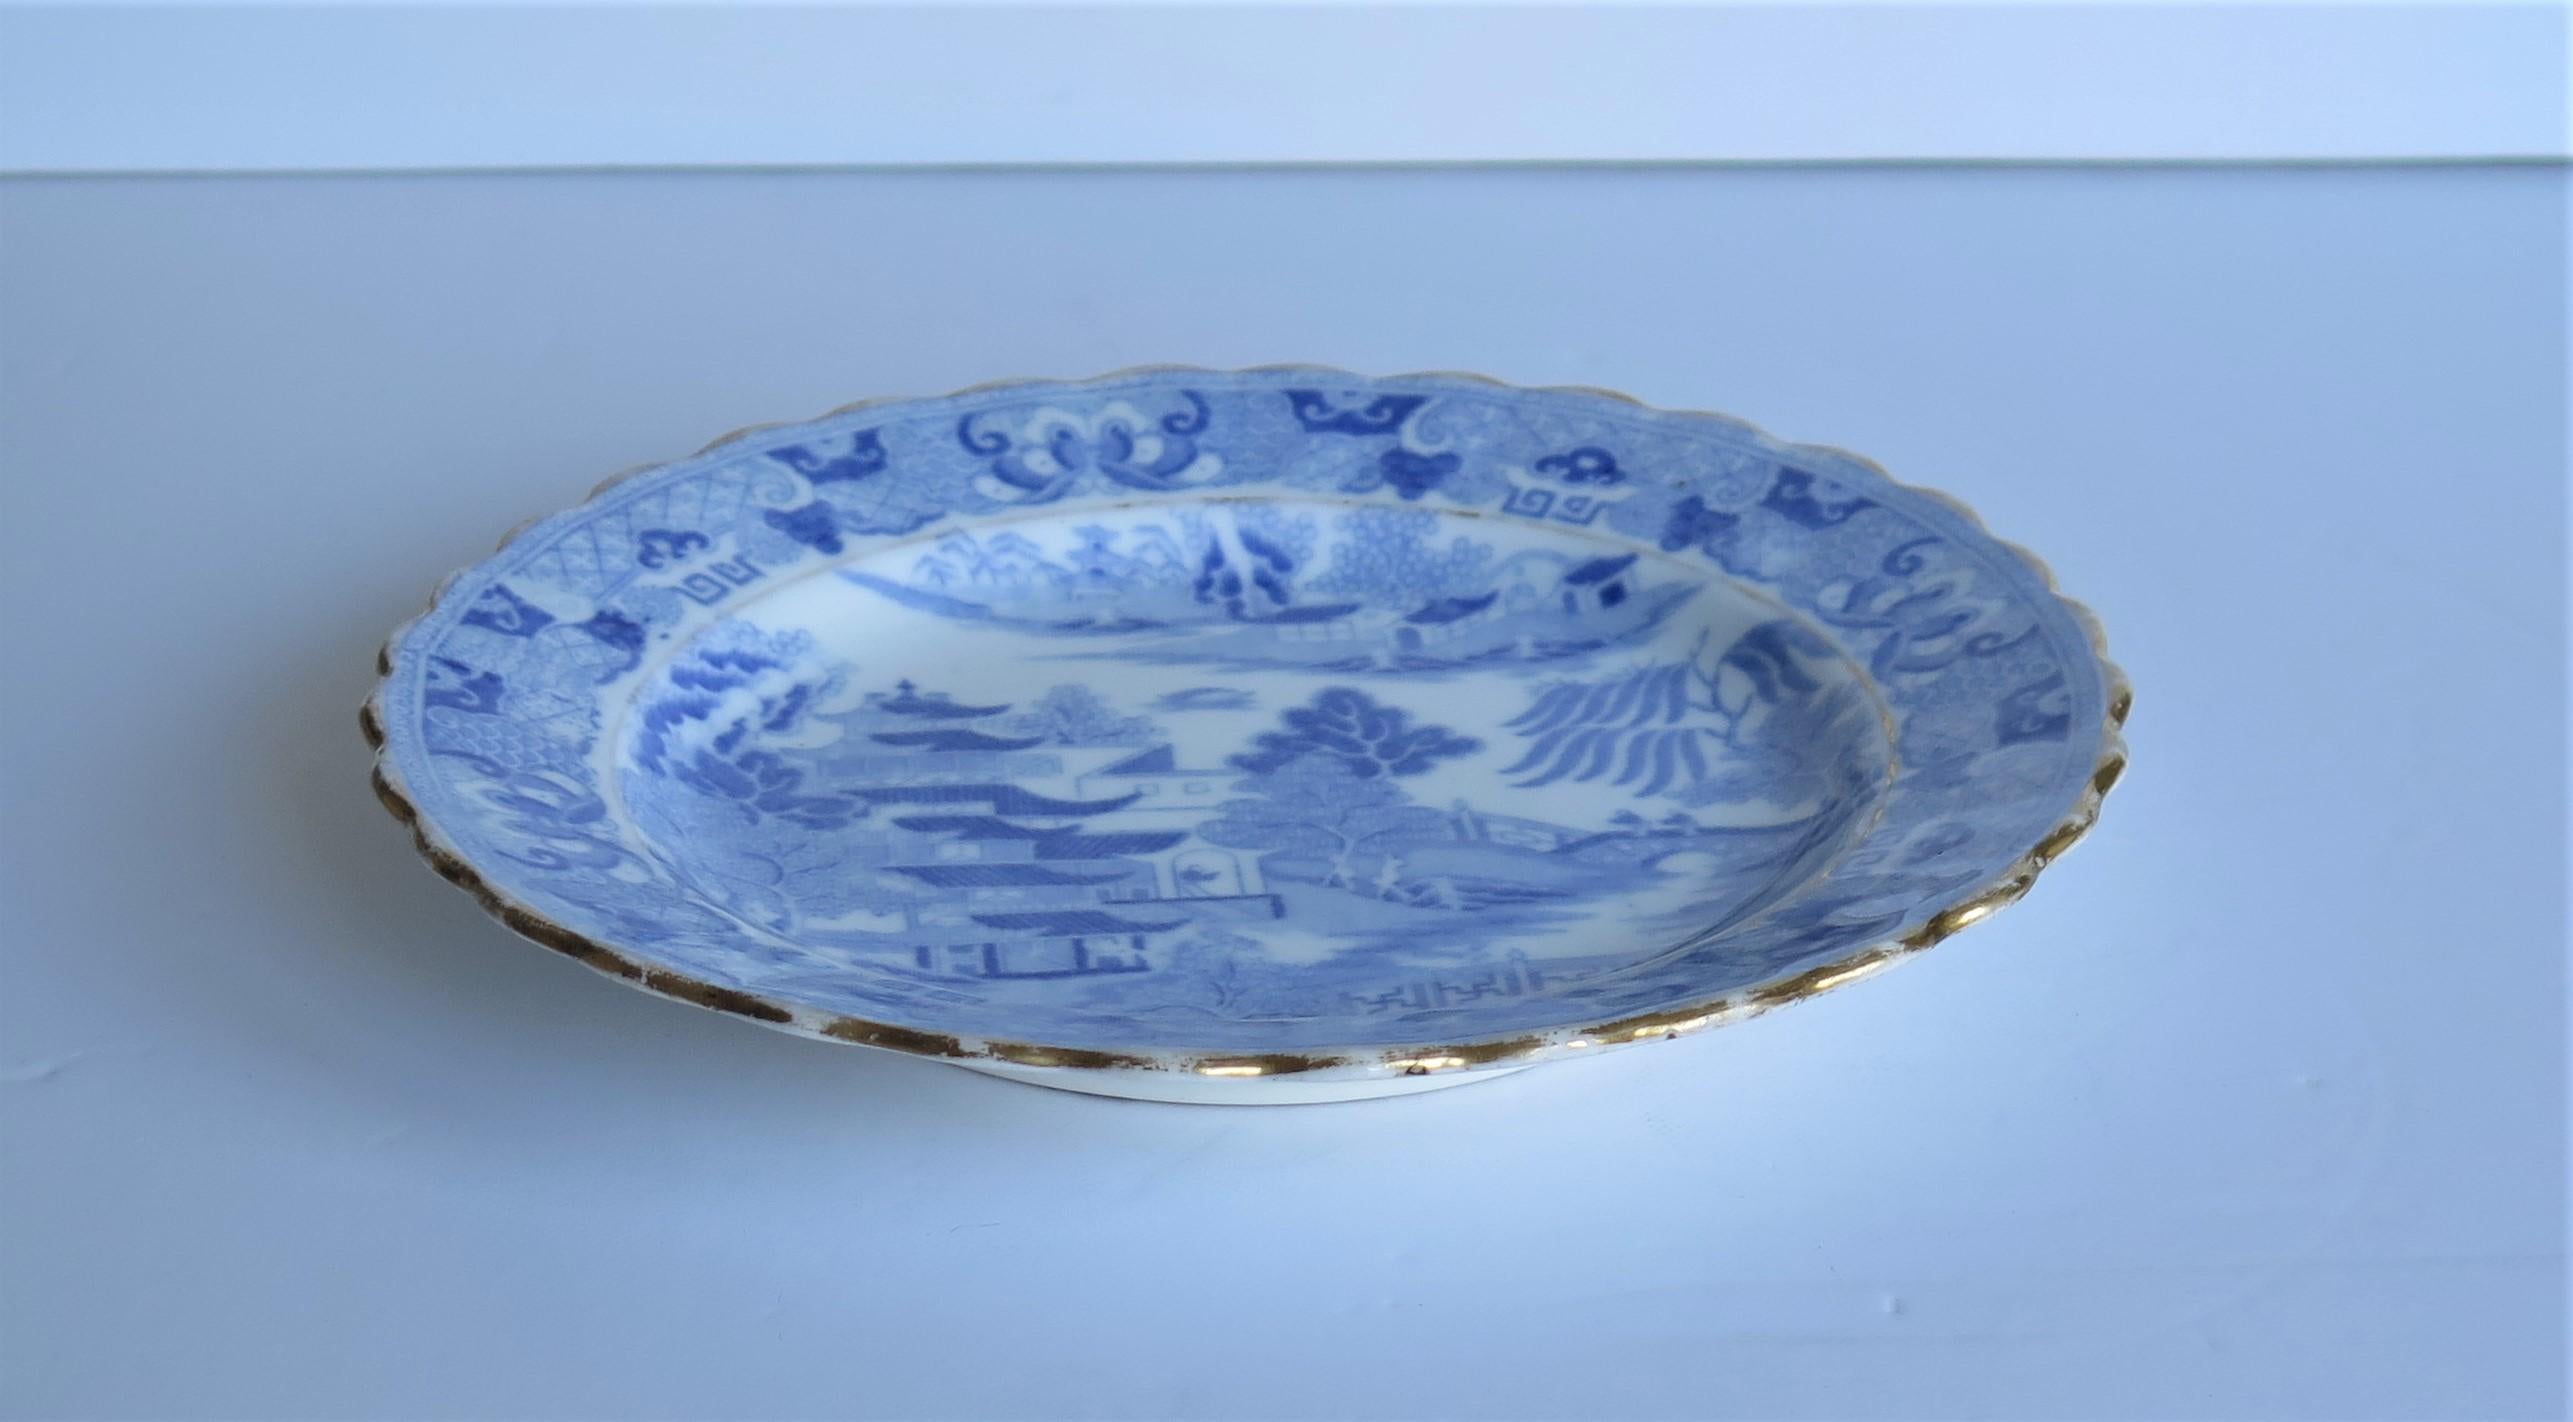 Glazed Early Miles Mason Desert Dish or Plate Blue and White Boy at the Door Pattern